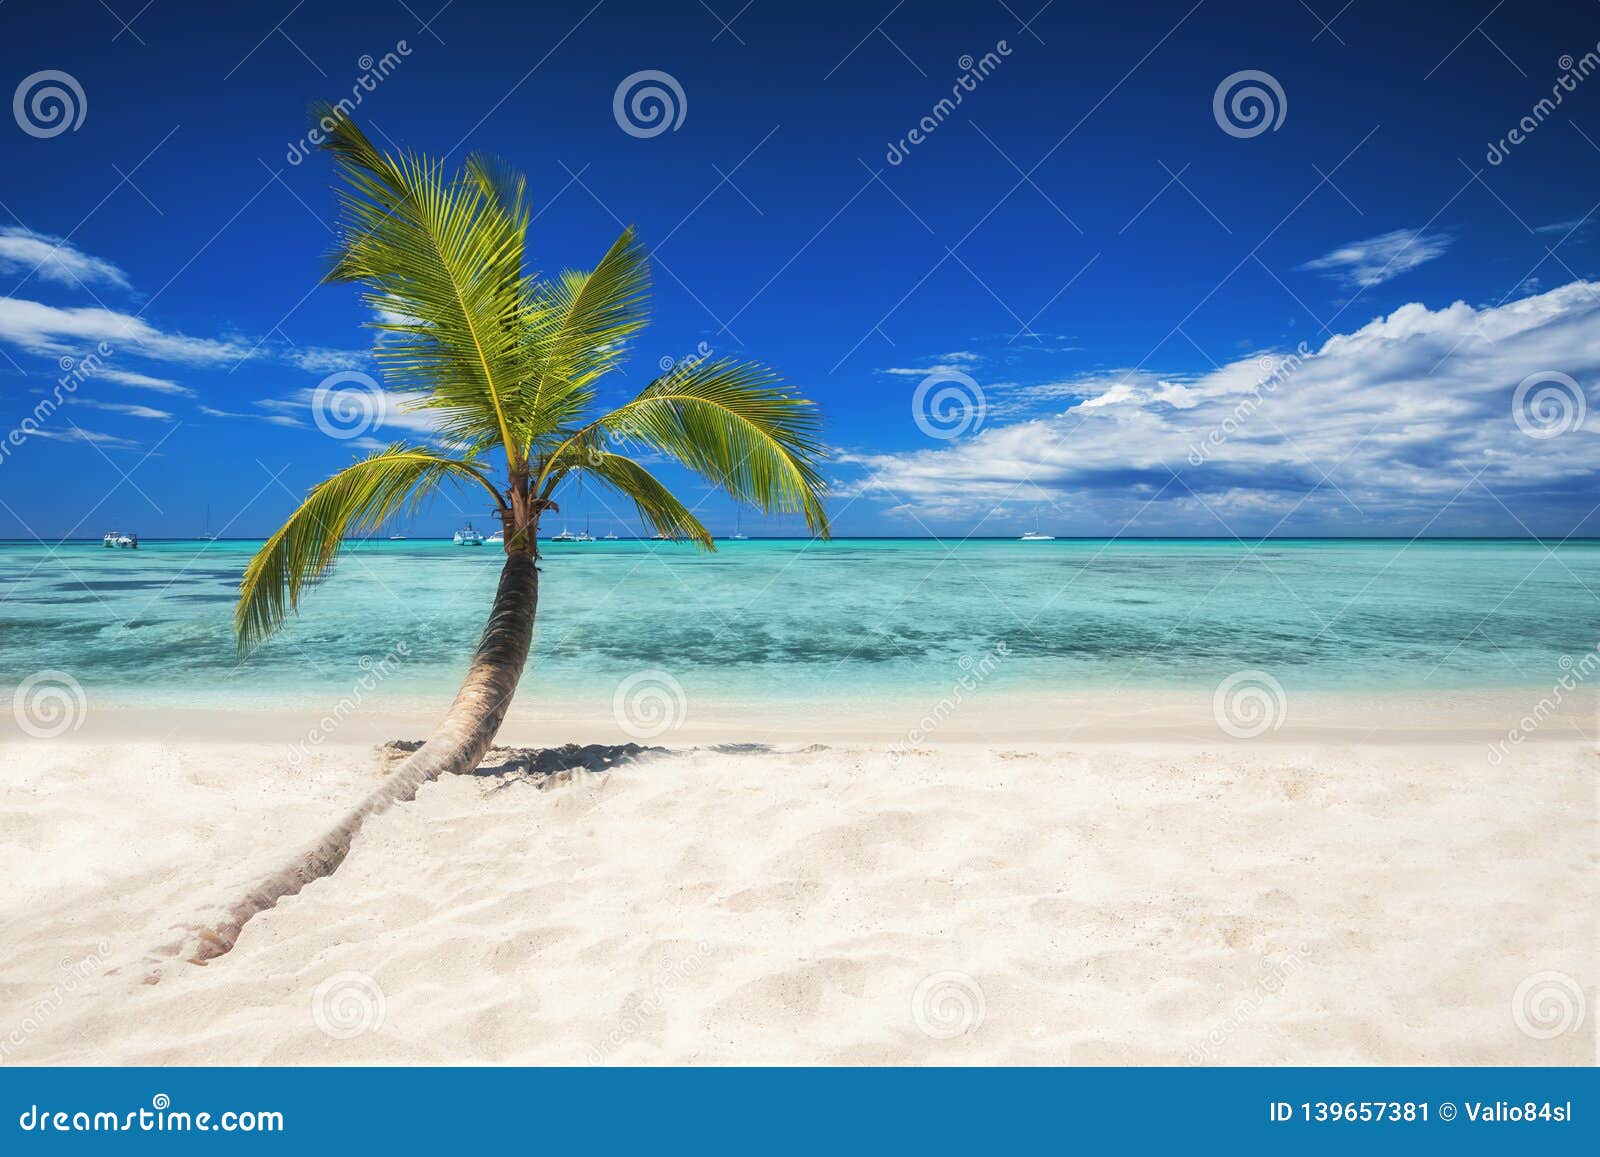 Tropical Beach with Palm Tree. Holiday and Vacation Concept Stock Image ...